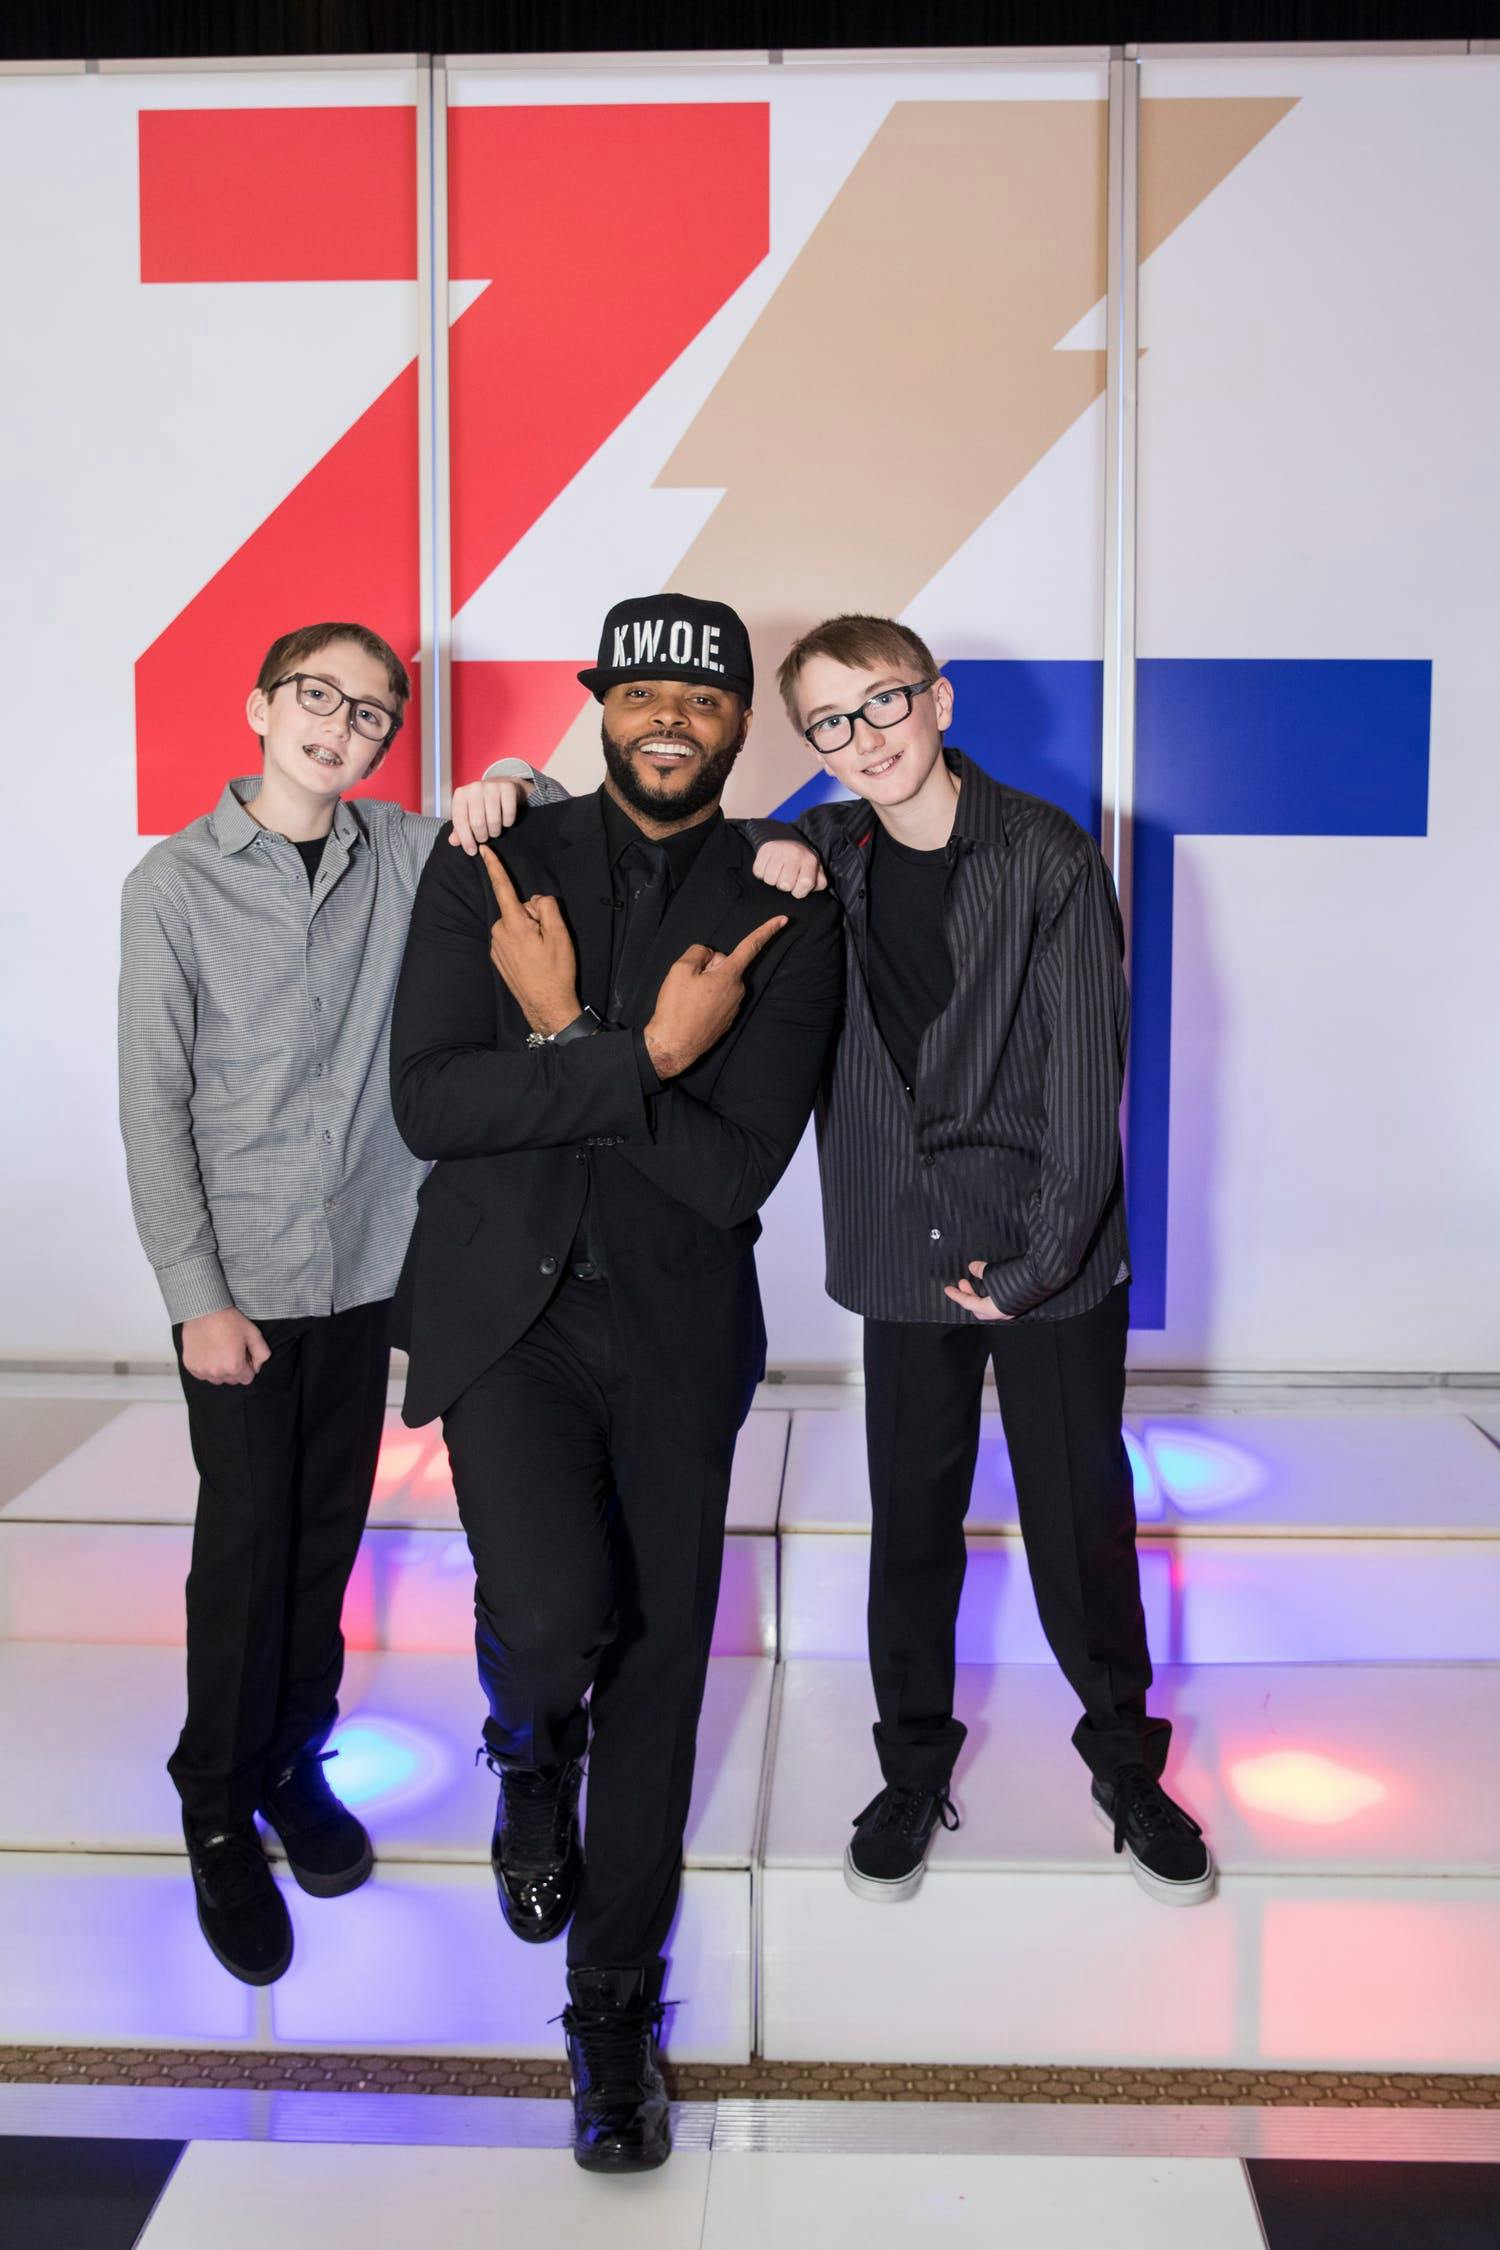 Kareem K.W.O.E. Wells of Flow Entertainment Inc. with Twin Bar Mitzvah Boys | PartySlate